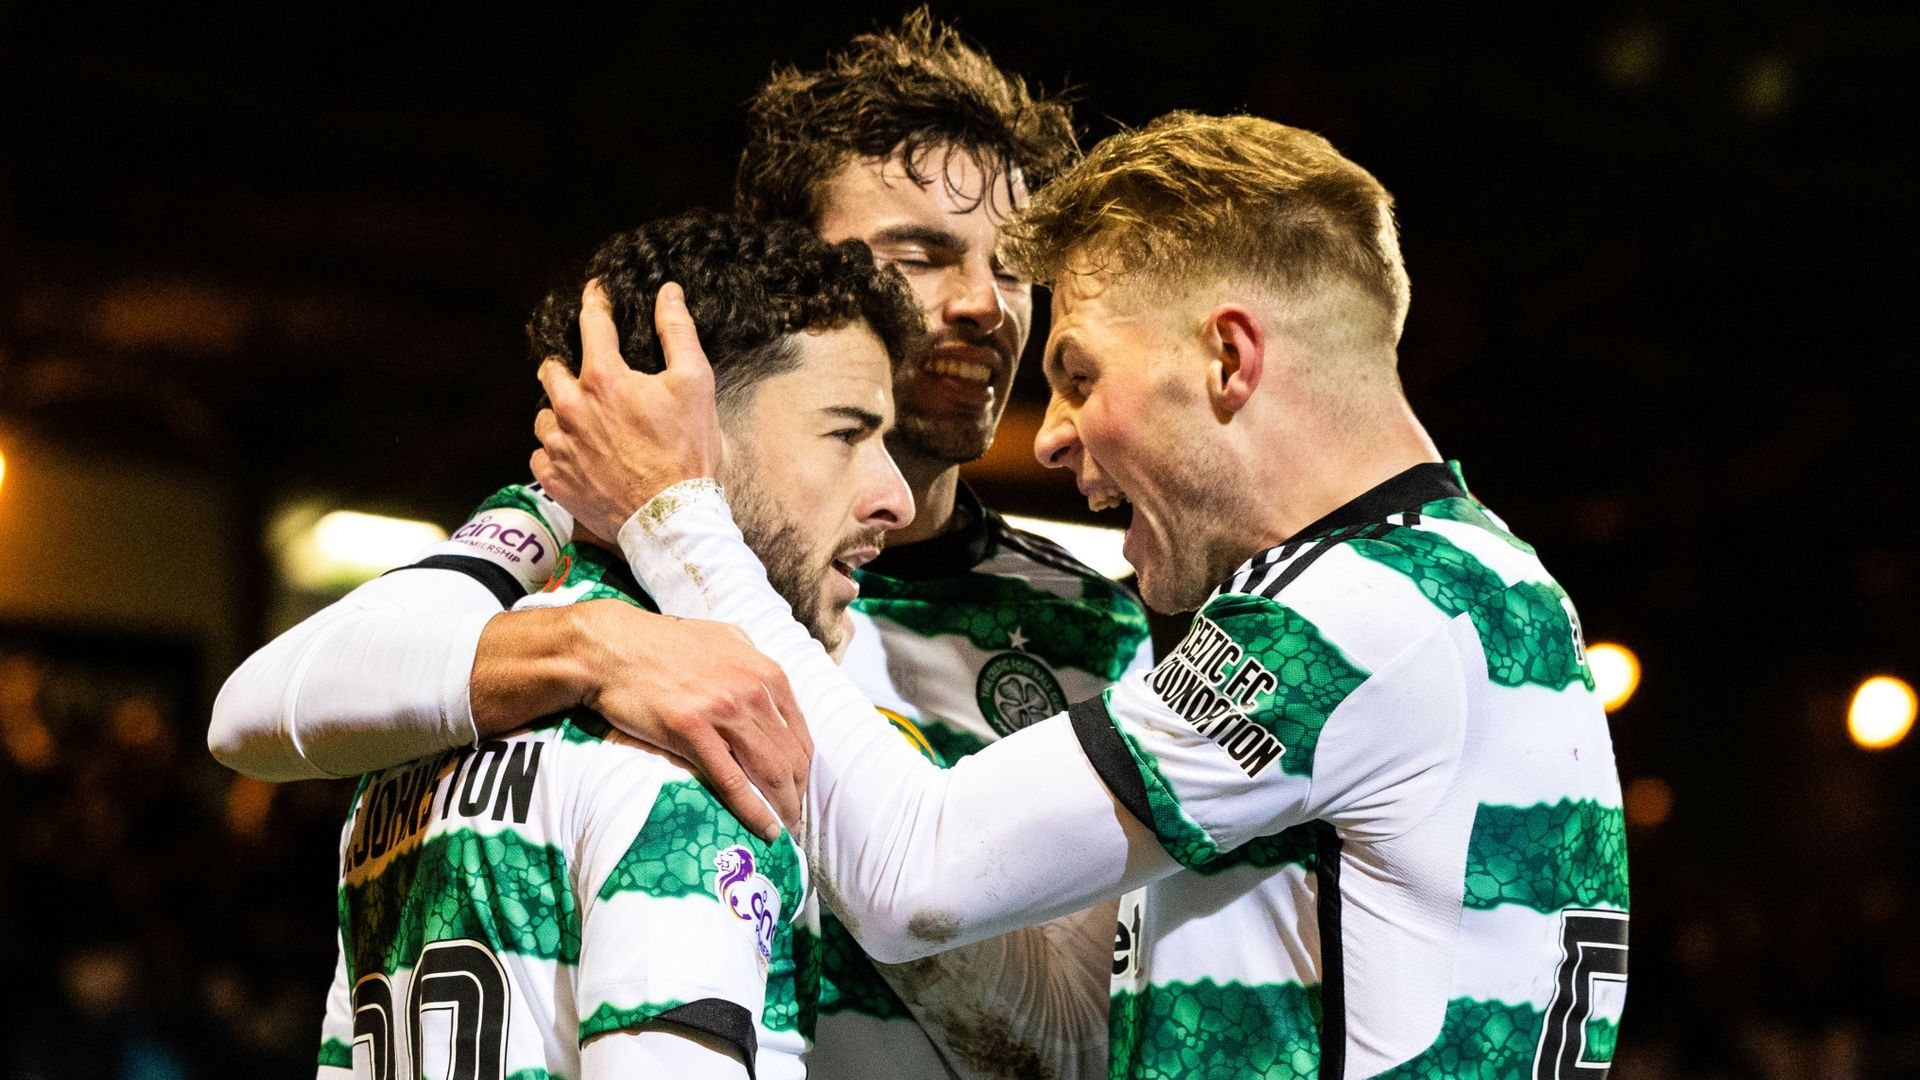 Celtic eventually ease past Dundee to go five clear of Rangers